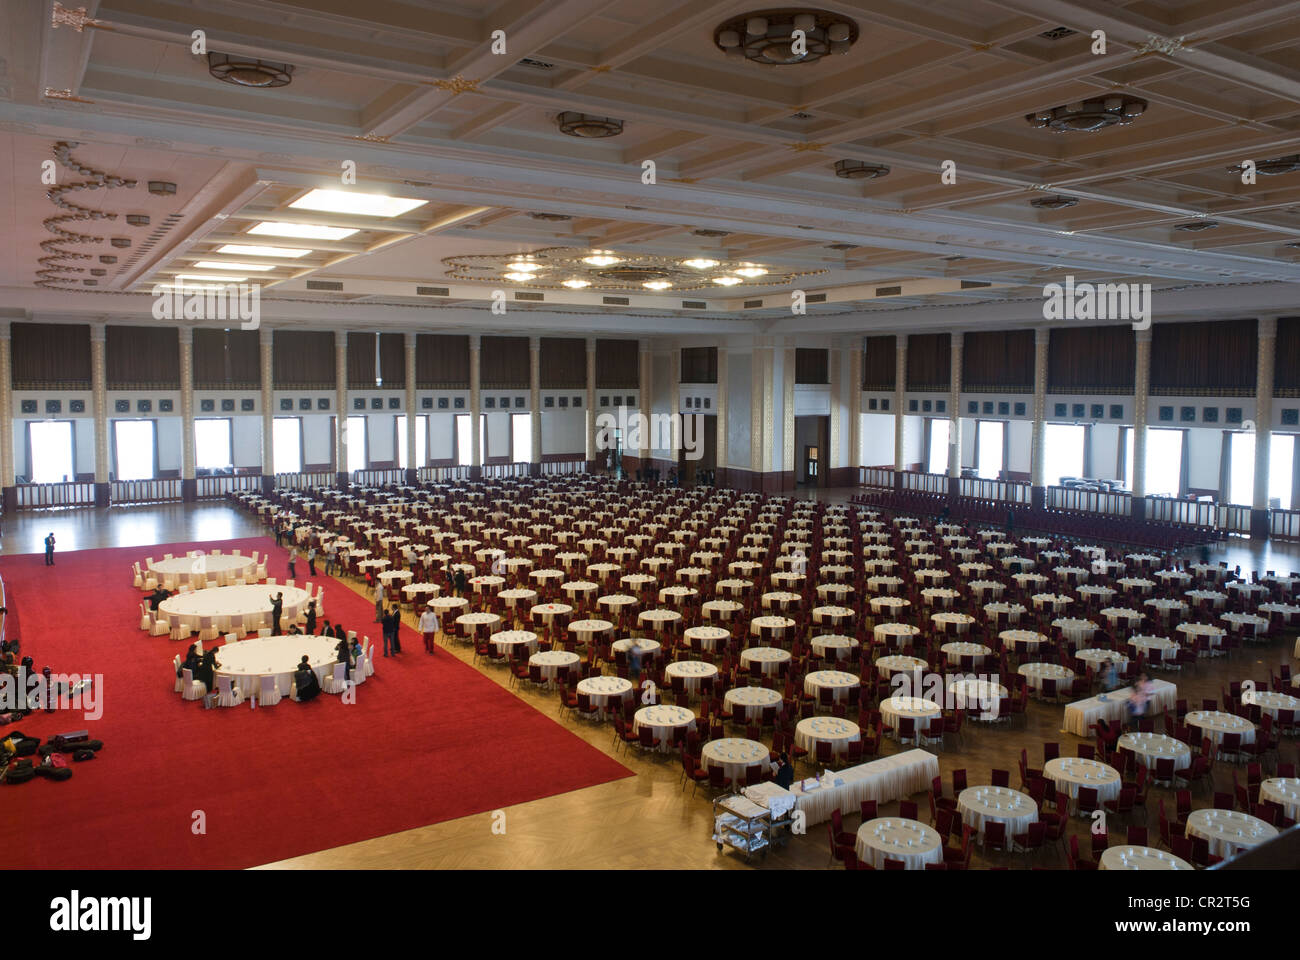 the Banquet hall of The Great Hall of the People Stock Photo